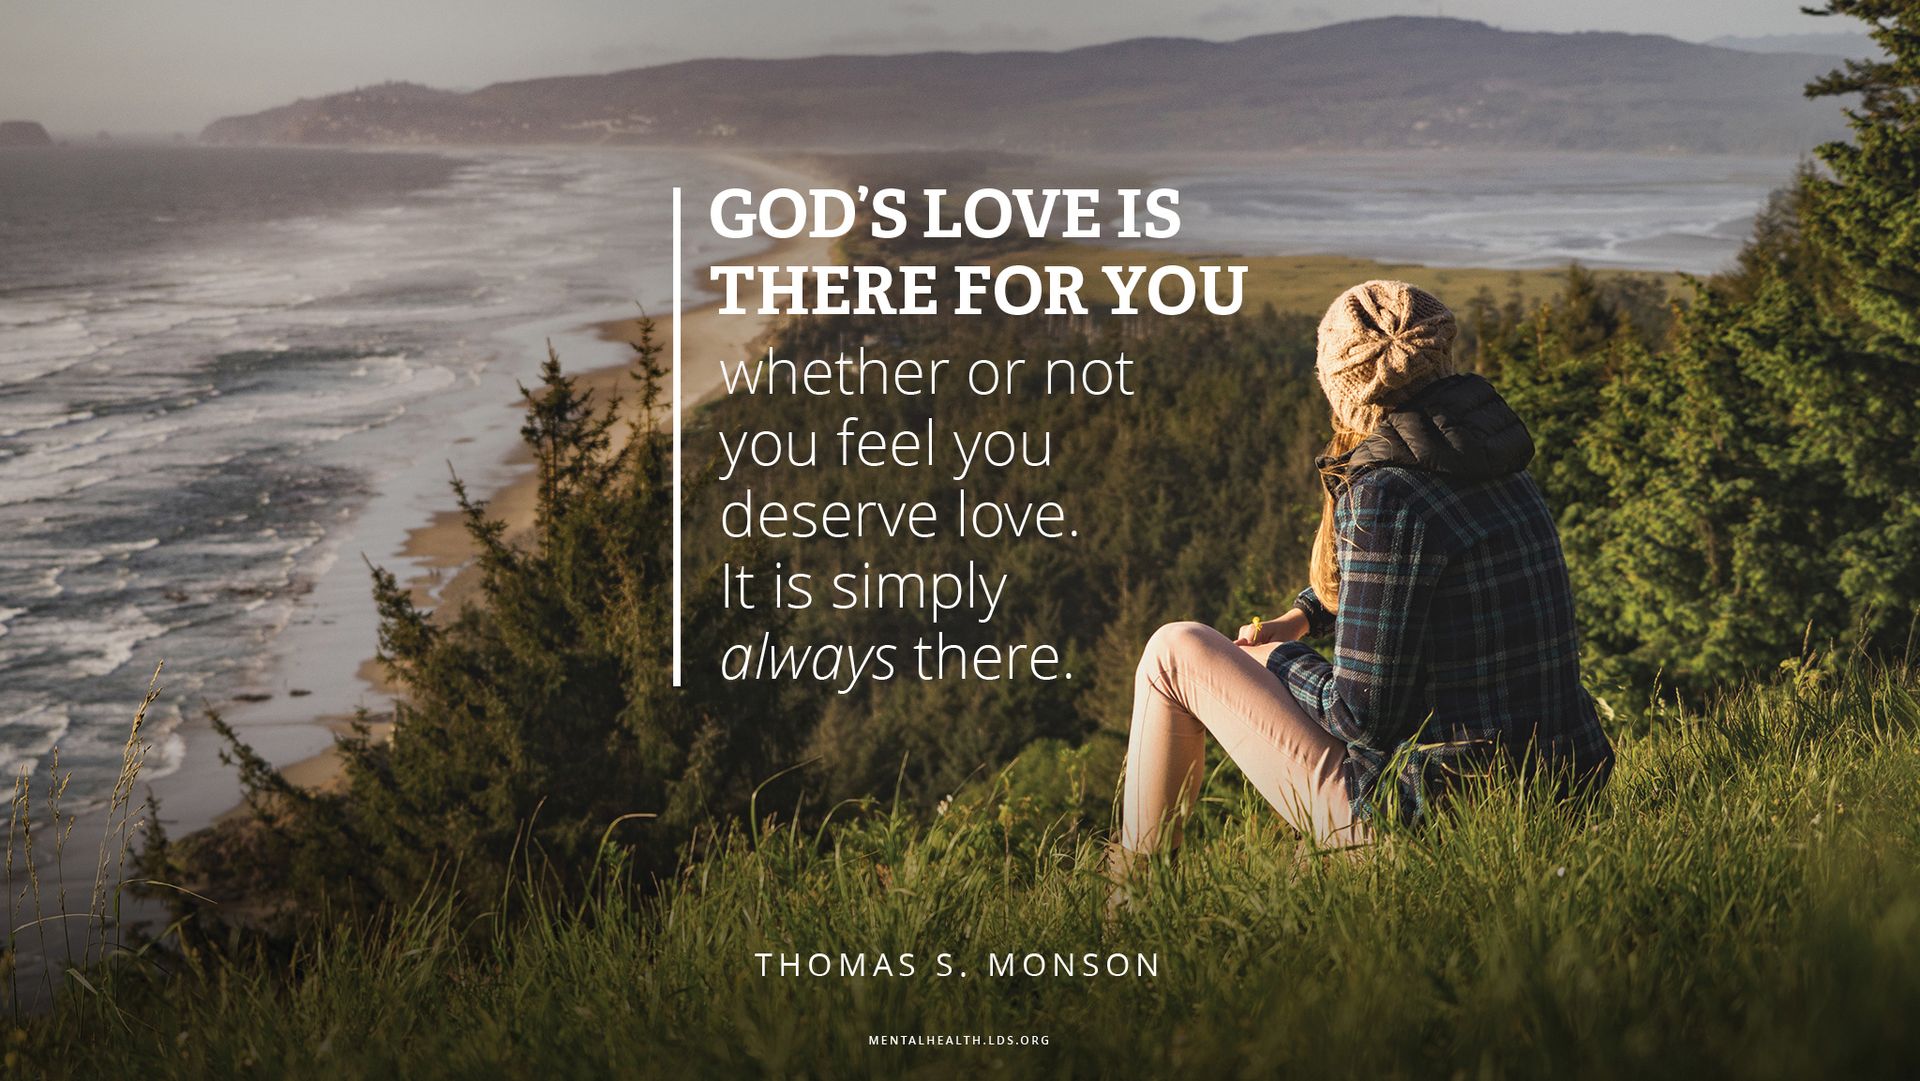 “God’s love is there for you whether or not you feel you deserve love. It is simply always there.”—President Thomas S. Monson, “We Never Walk Alone”